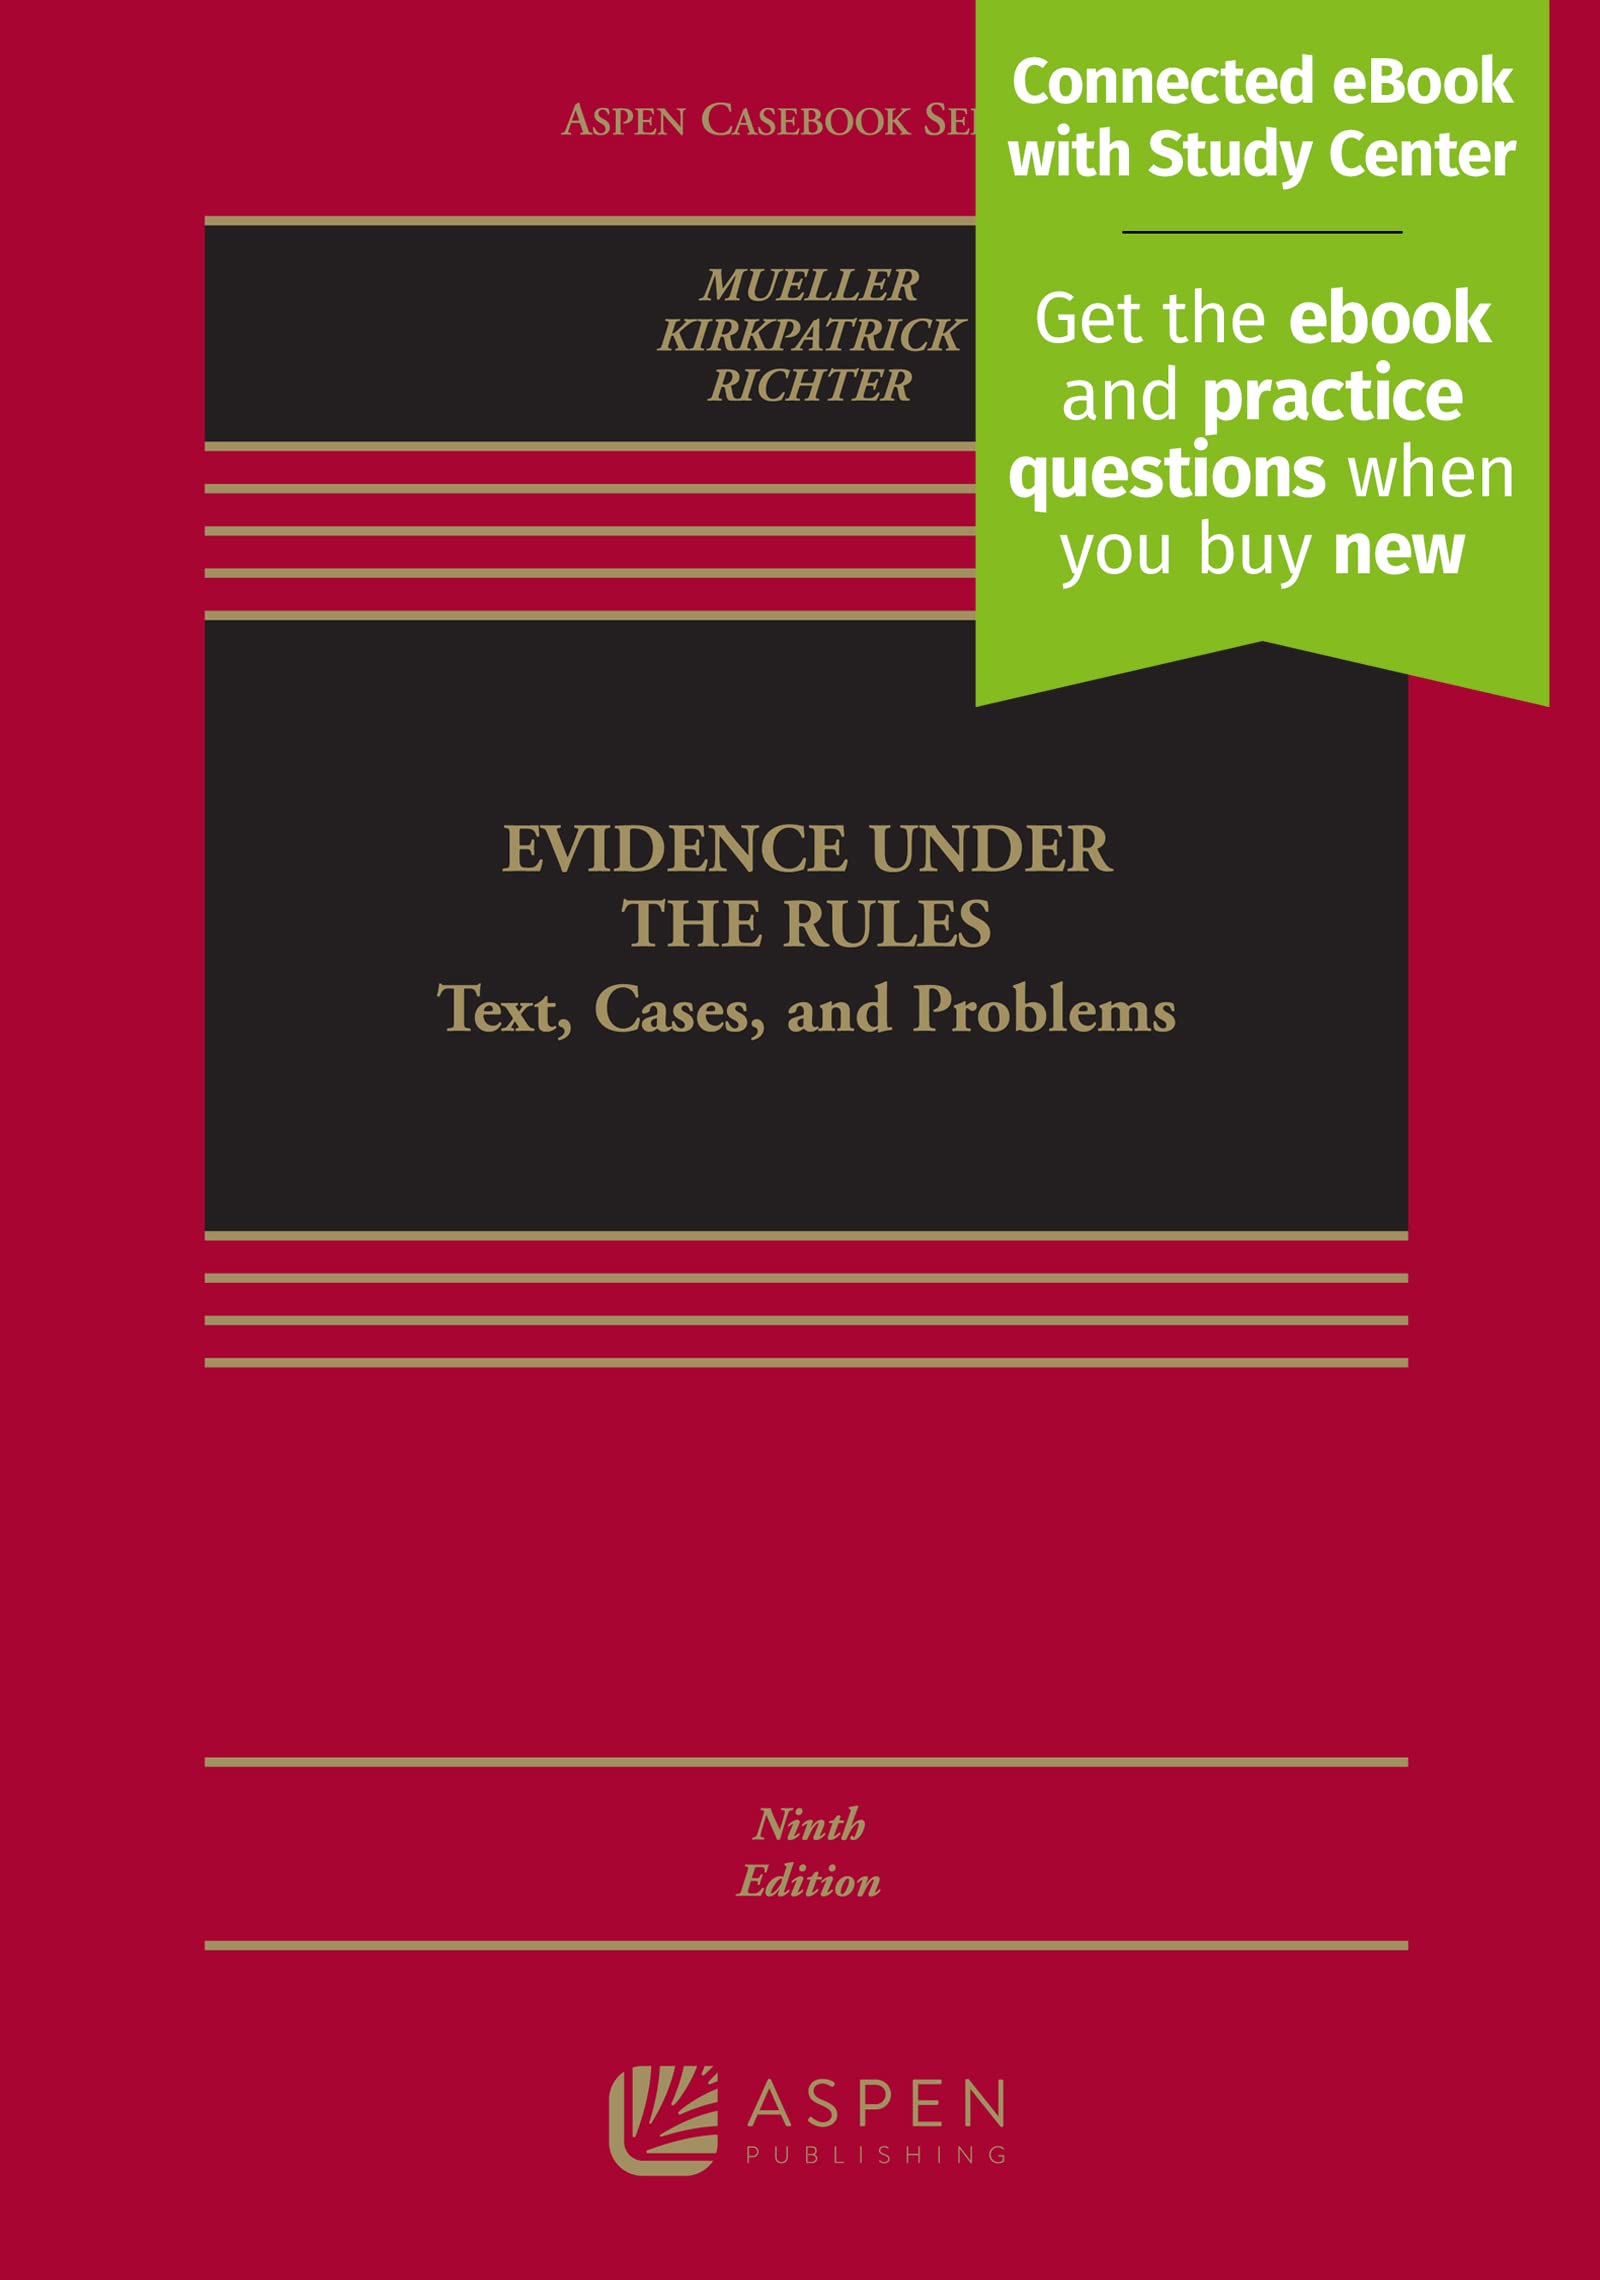 Book Cover Evidence Under the Rules: Text, Cases, and Problems [Connected eBook with Study Center] (Aspen Casebook)